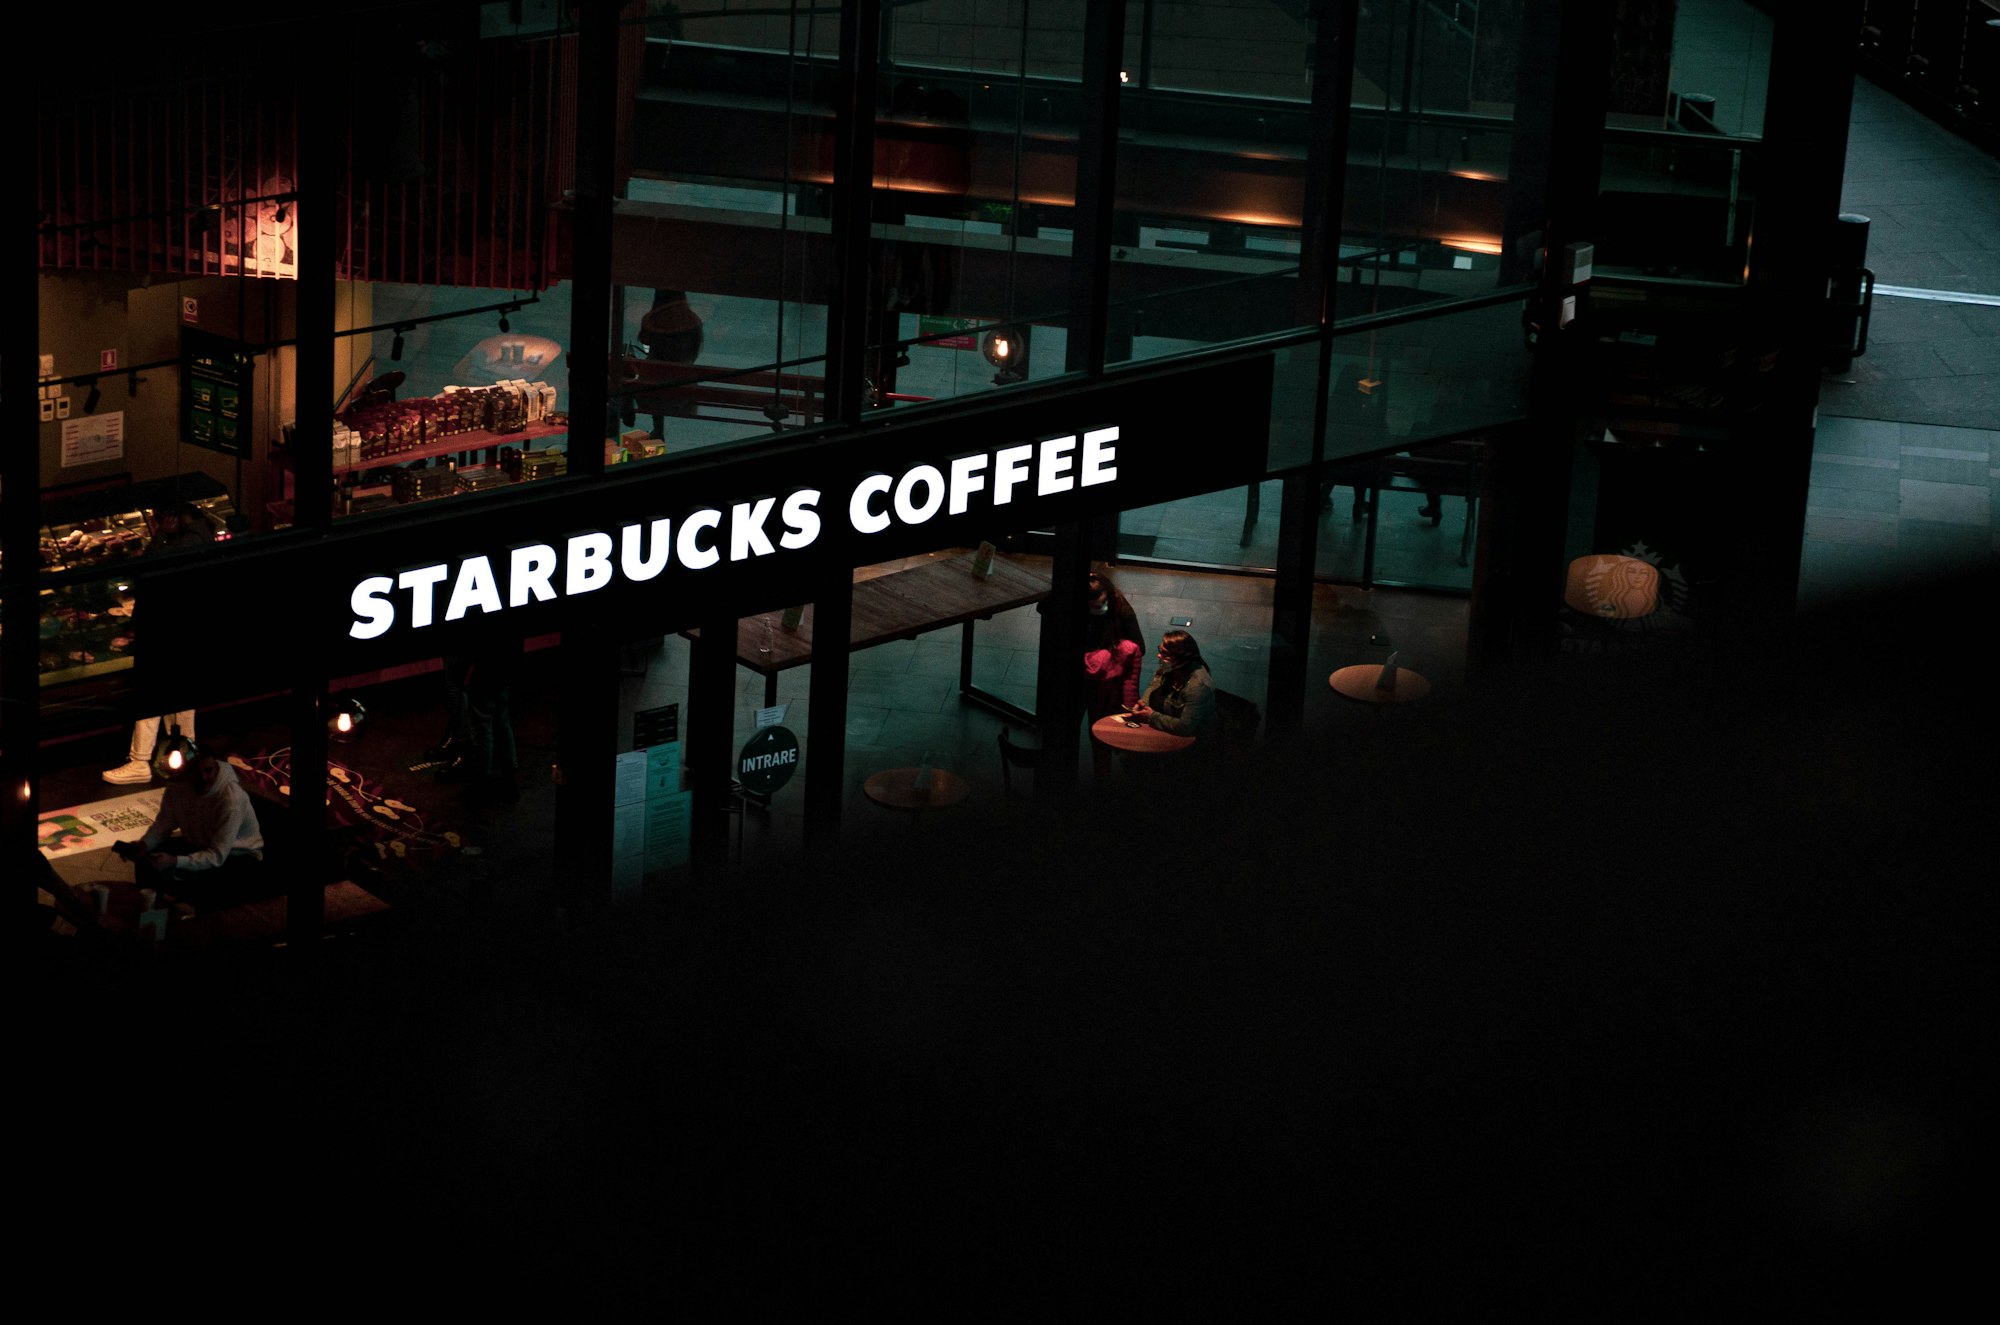 Did Starbucks really ditch their CMO role?